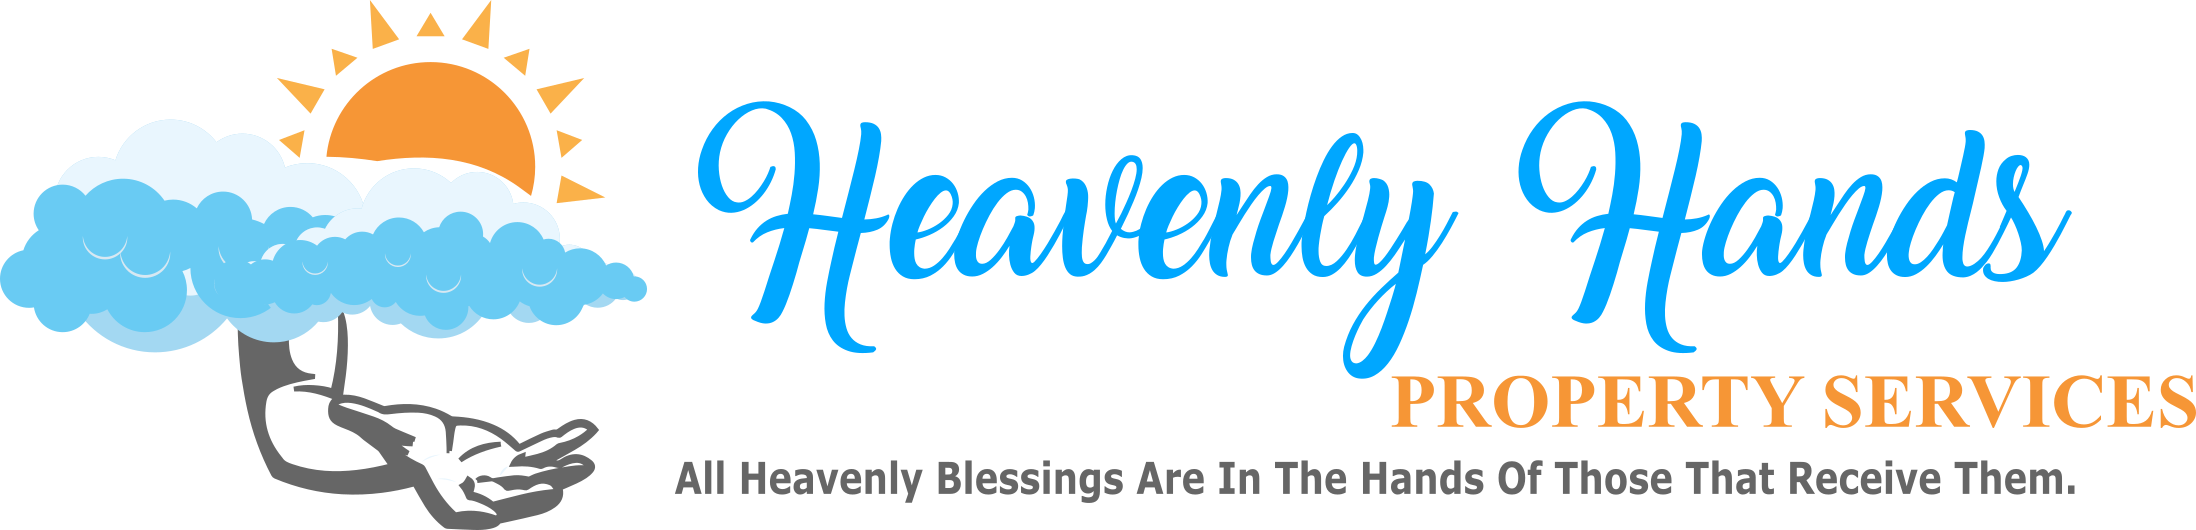 Heavenly Hands Property Services Logo